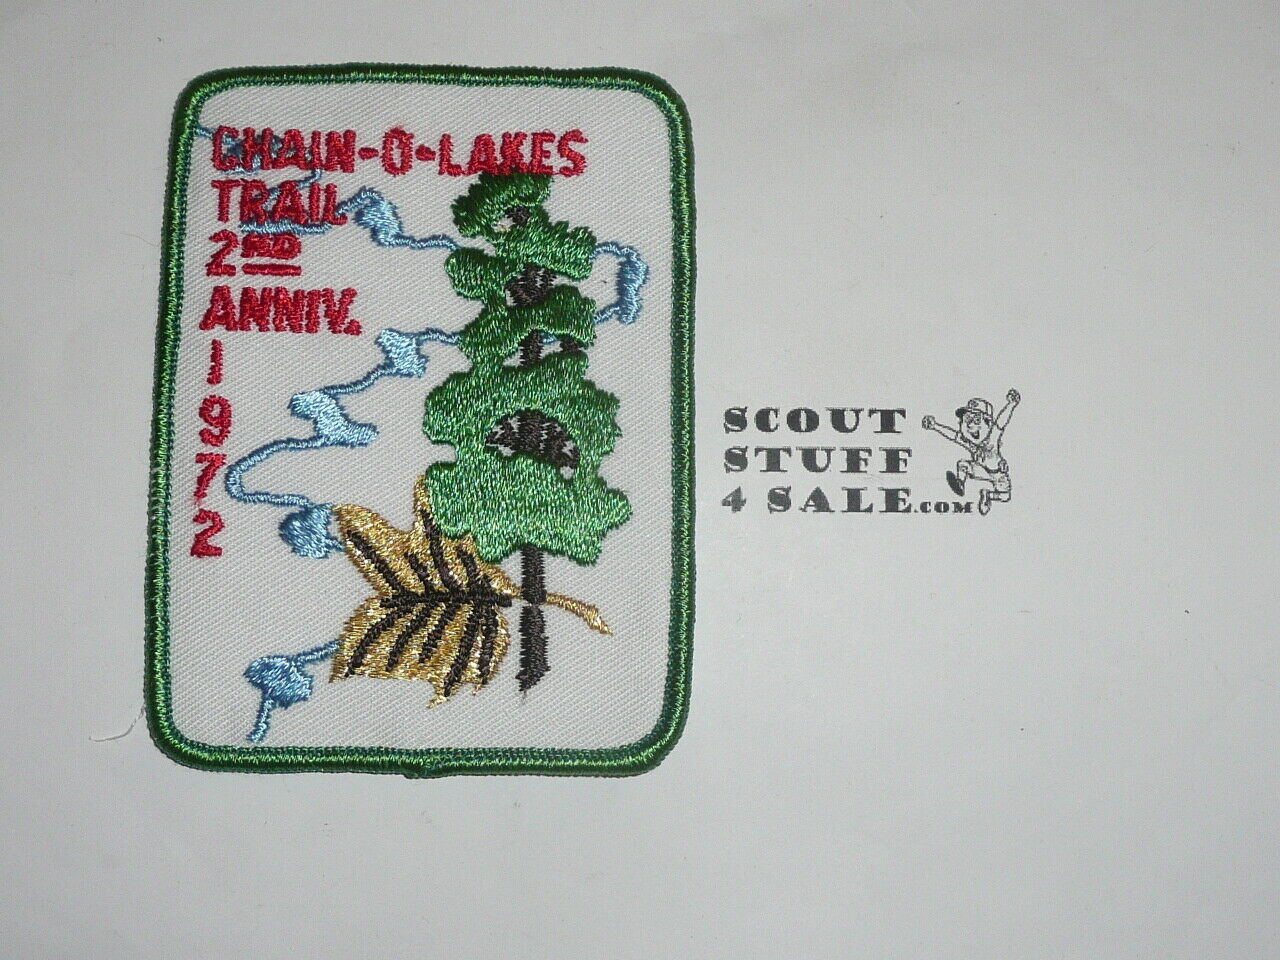 1972 Chain-O-Lakes Trail Patch